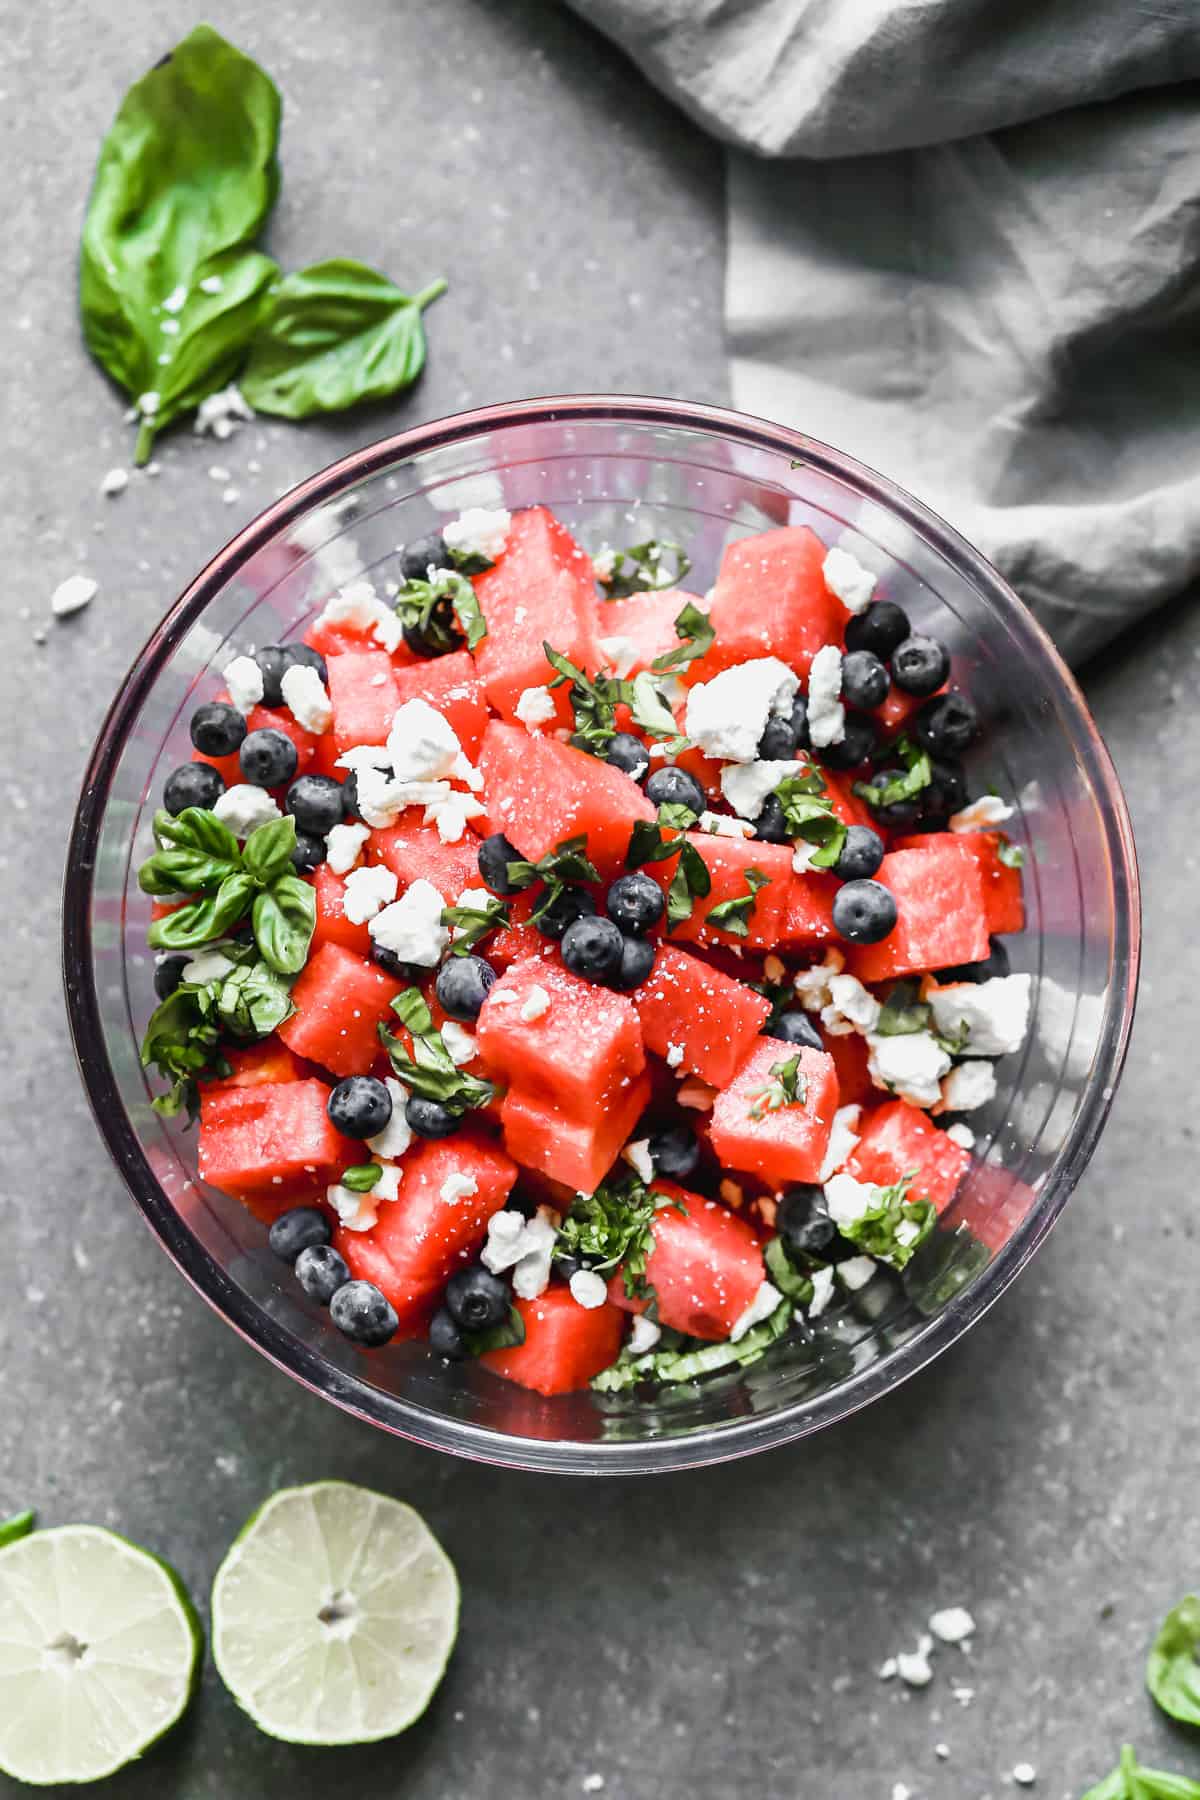 A Watermelon Salad made with fresh watermelon, blueberries, basil, and feta cheese.